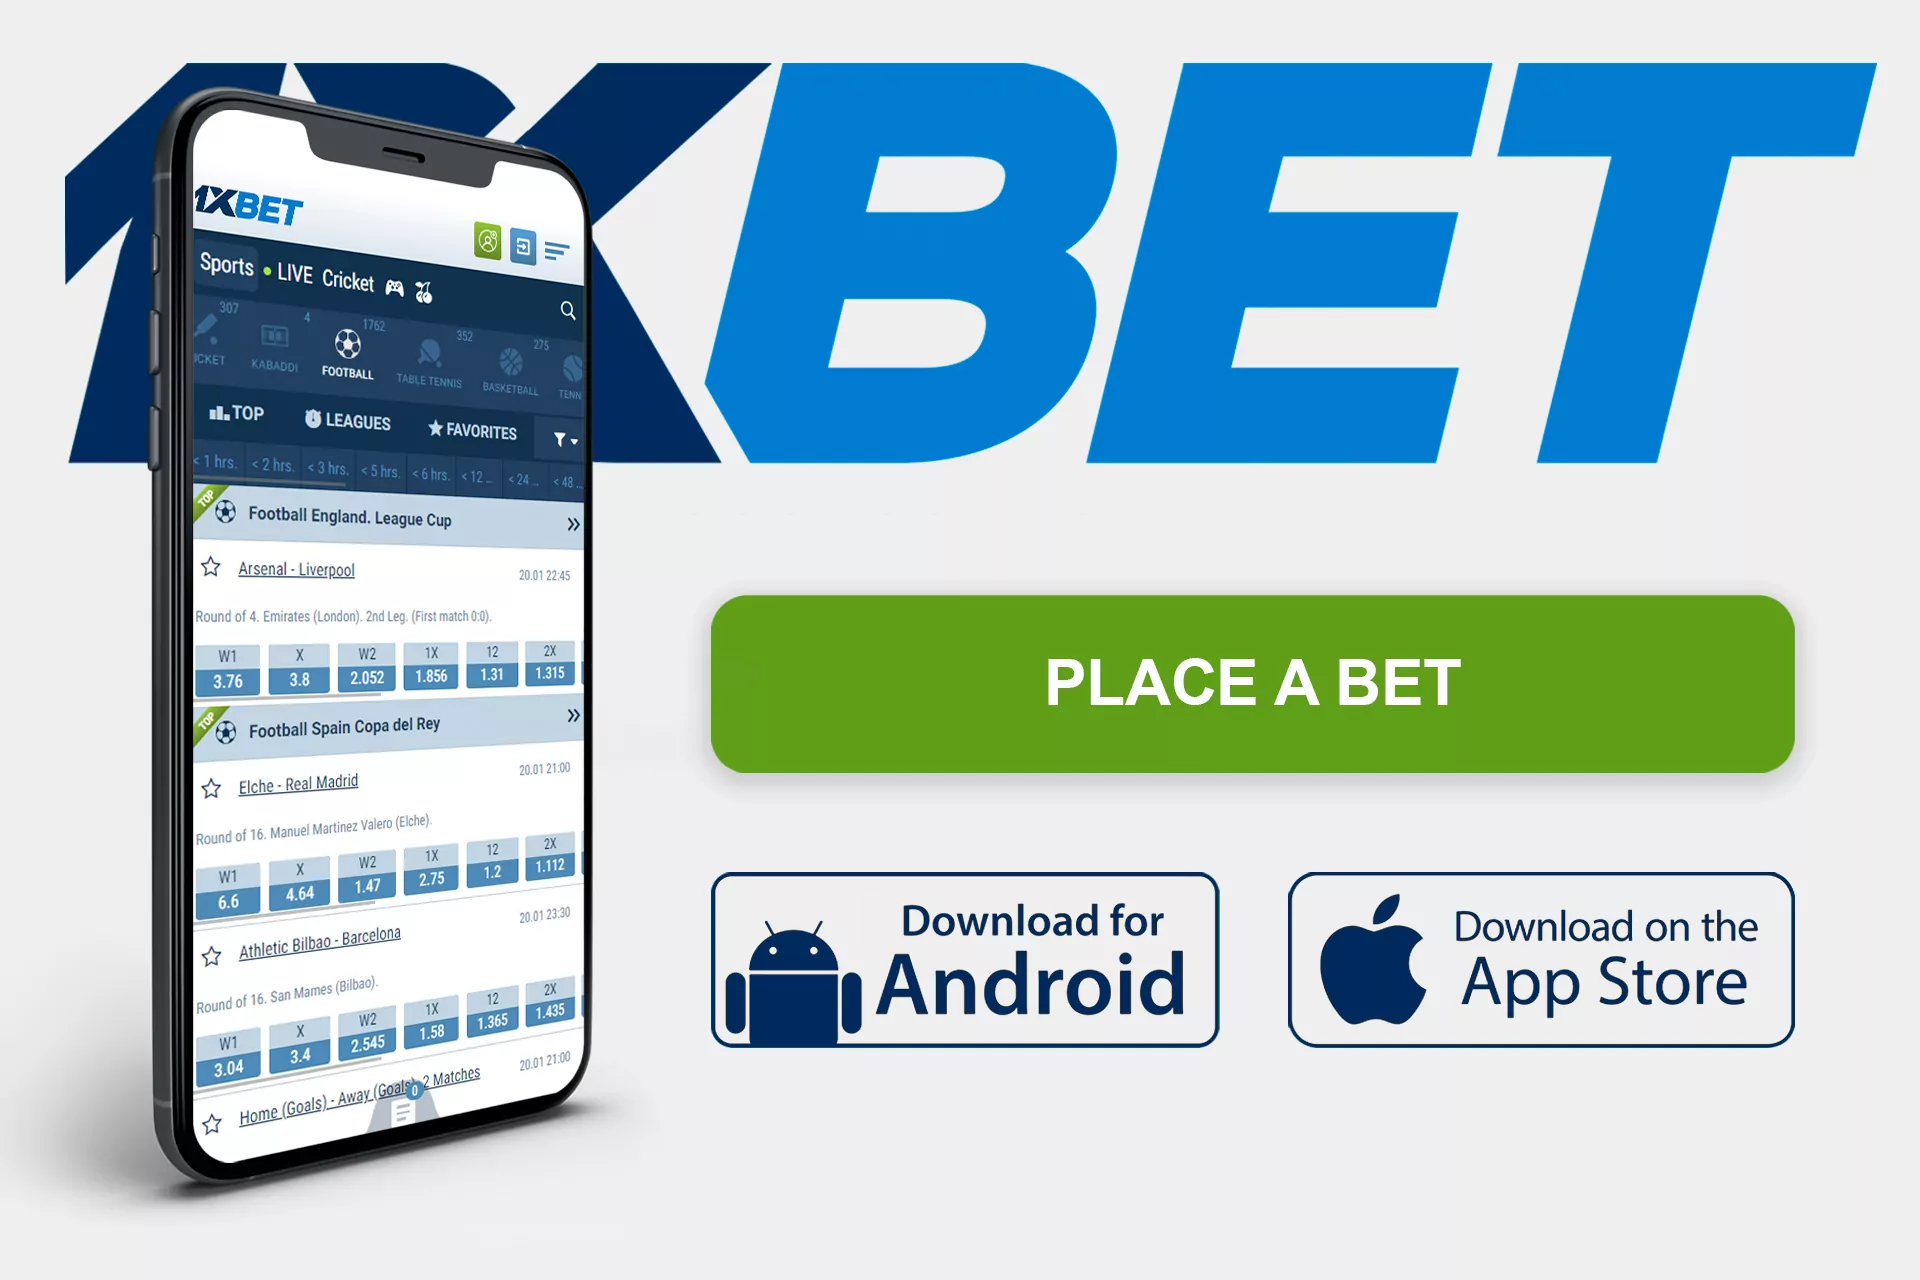 Betting in the 1xBet app is the same way as you place bets on the site.